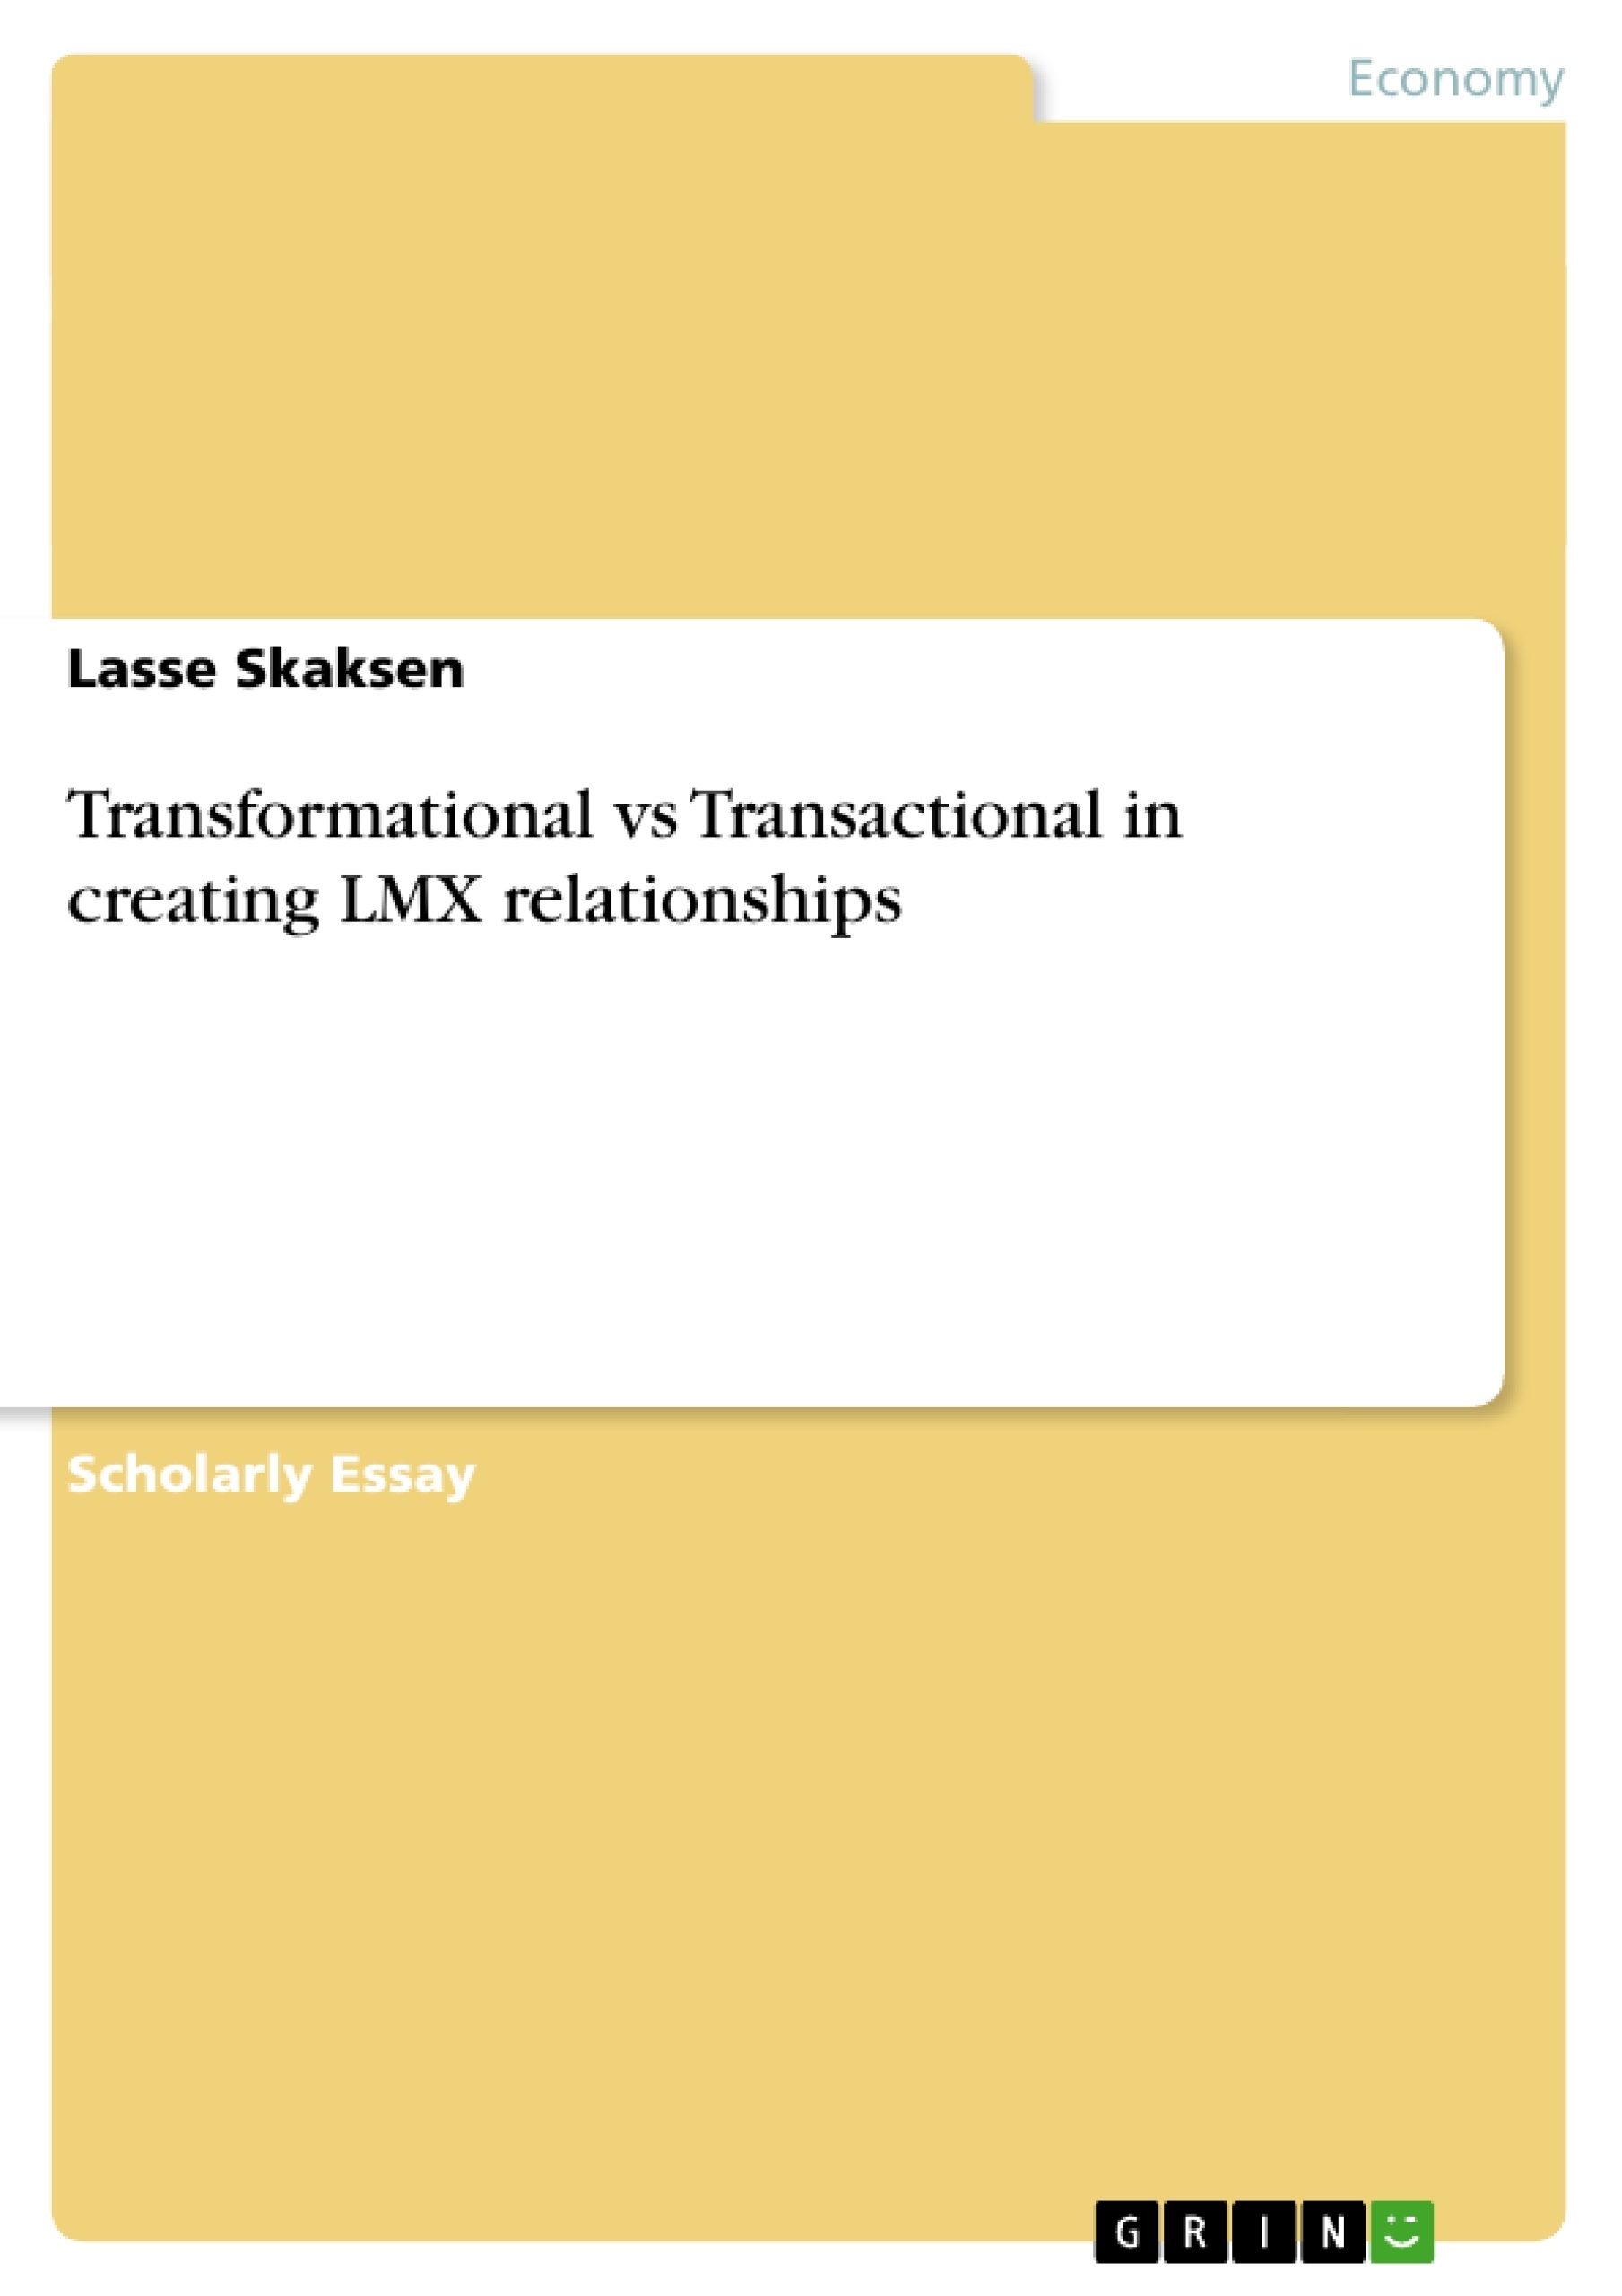 Título: Transformational vs Transactional in creating LMX relationships